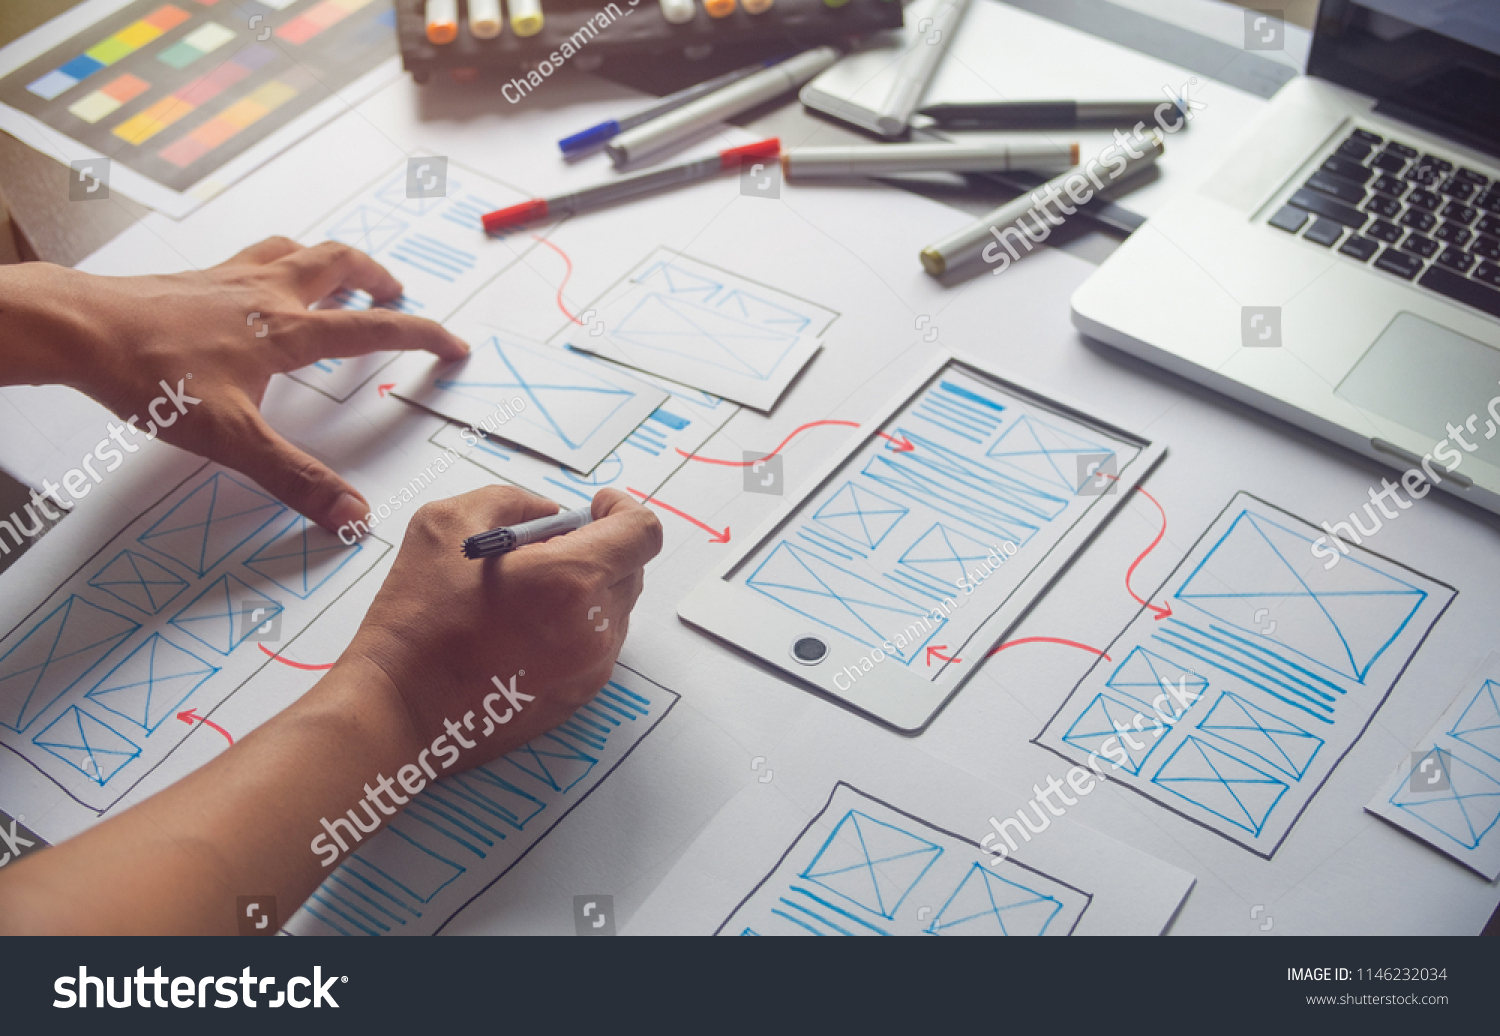 ux Graphic designer creative  sketch planning application process development prototype wireframe for web mobile phone . User experience concept. #1146232034